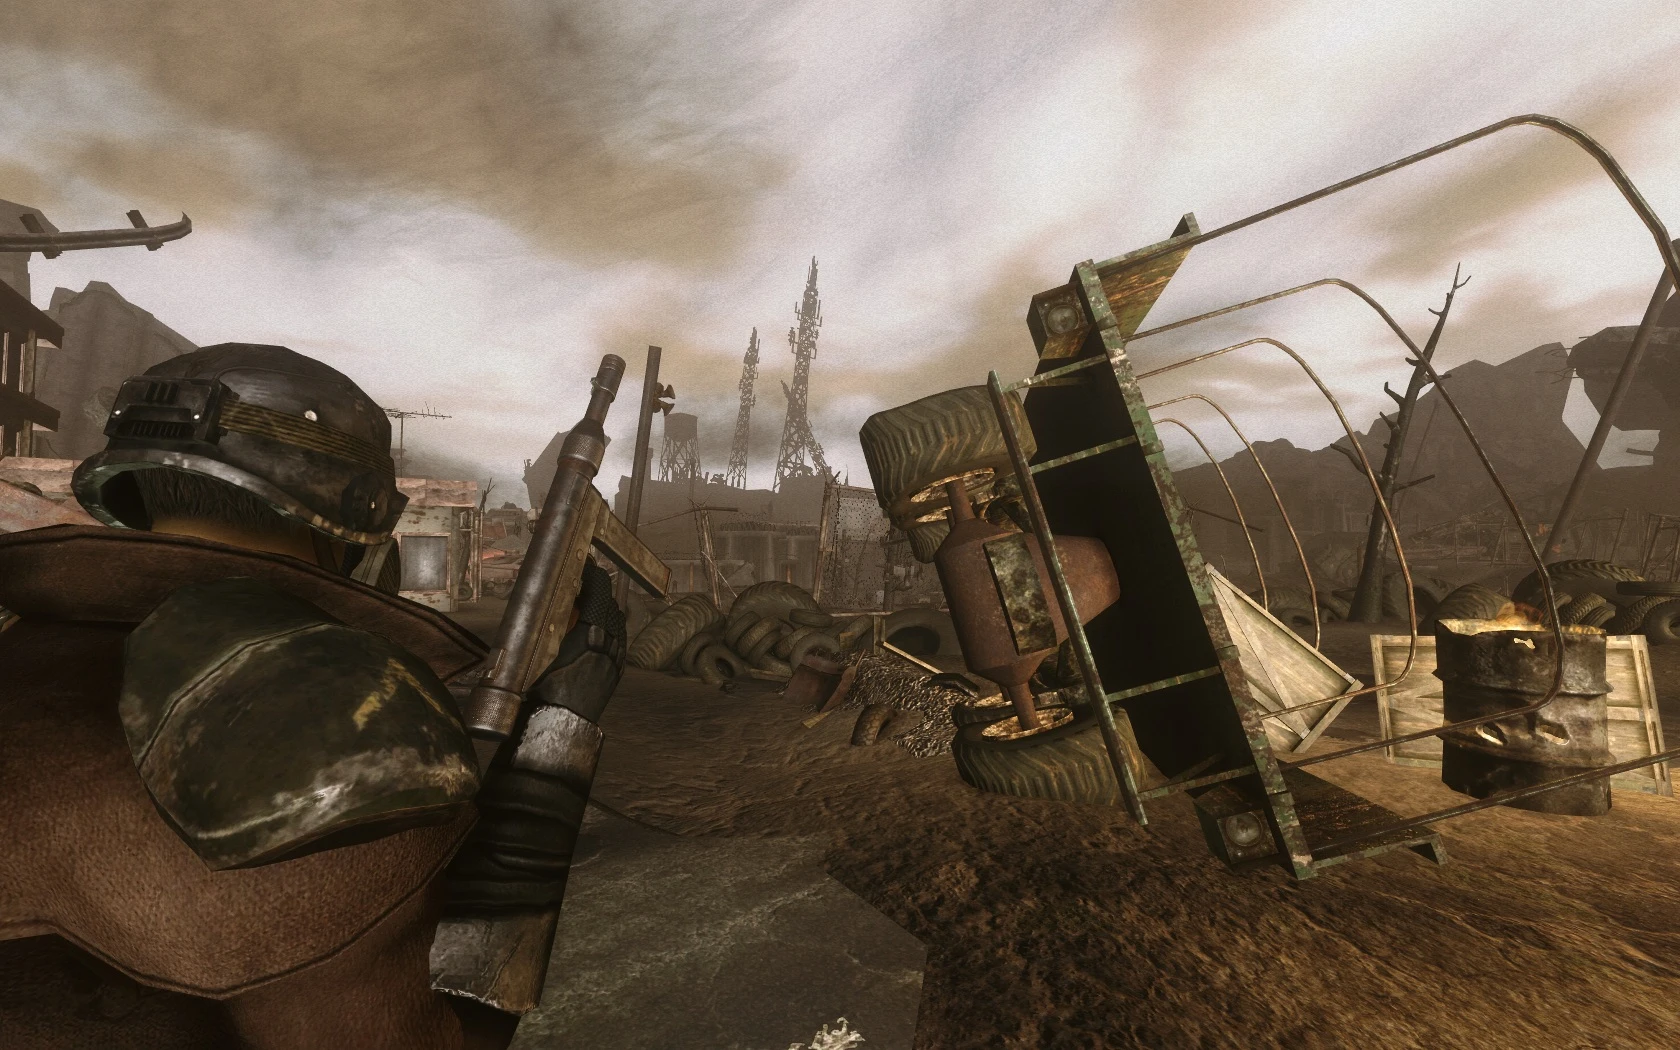 OJO BUENO Texture Pack at Fallout New Vegas - mods and community